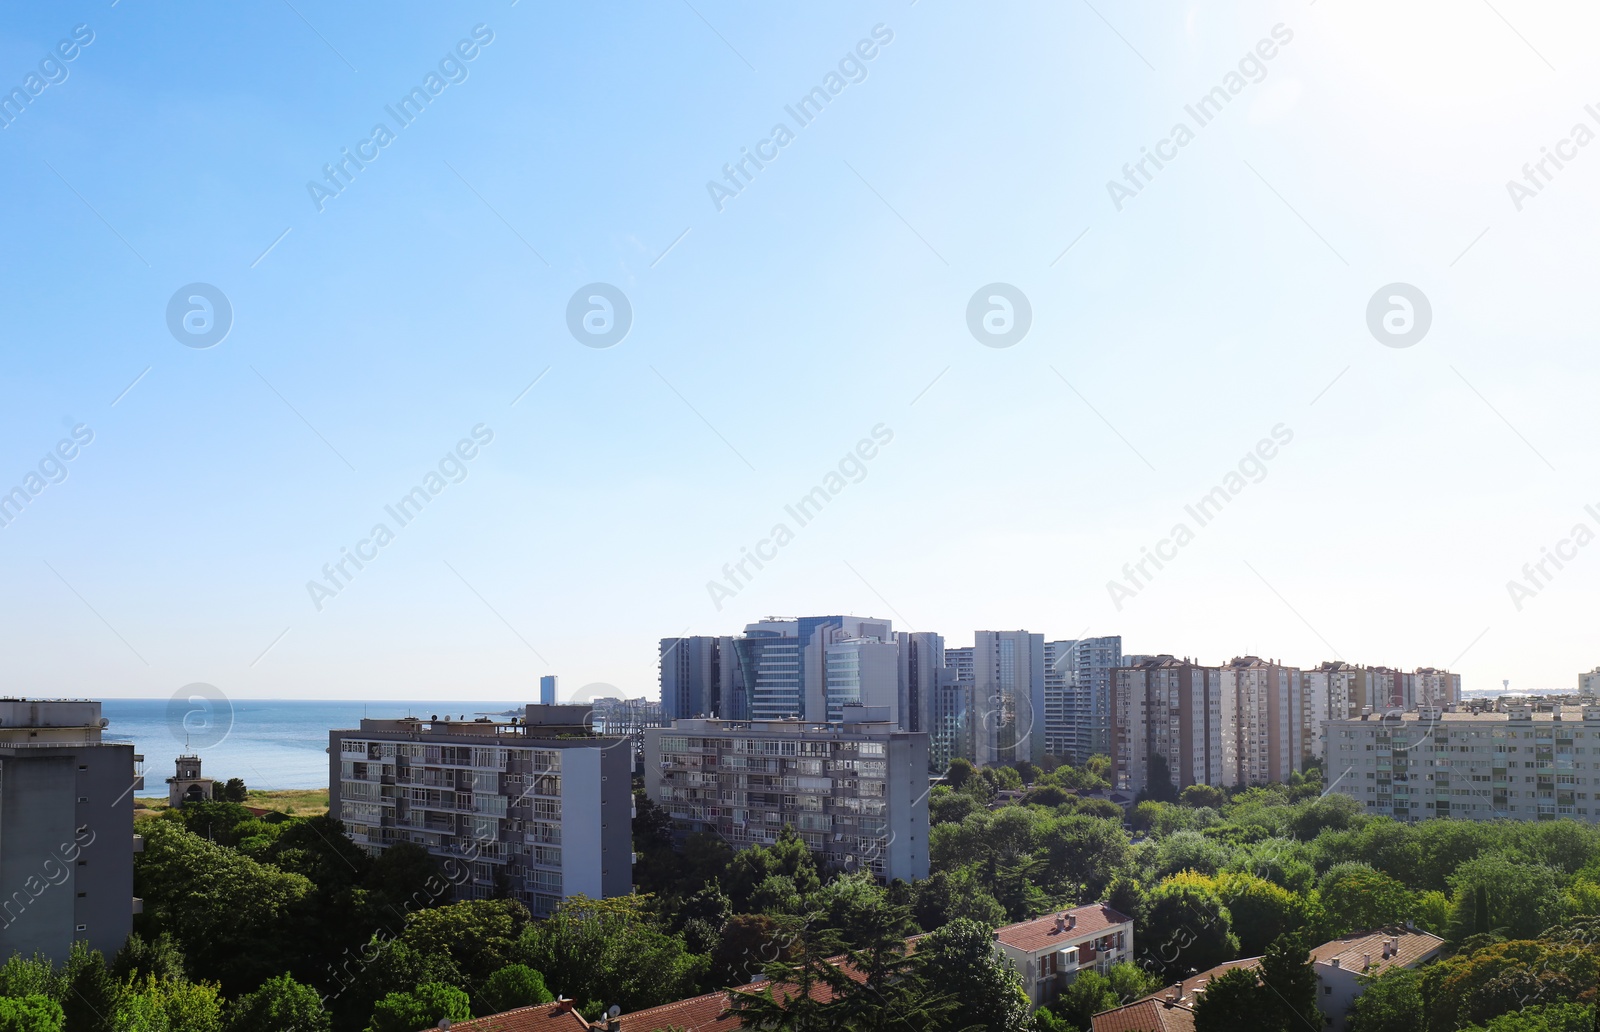 Photo of Picturesque view of city with beautiful buildings near sea